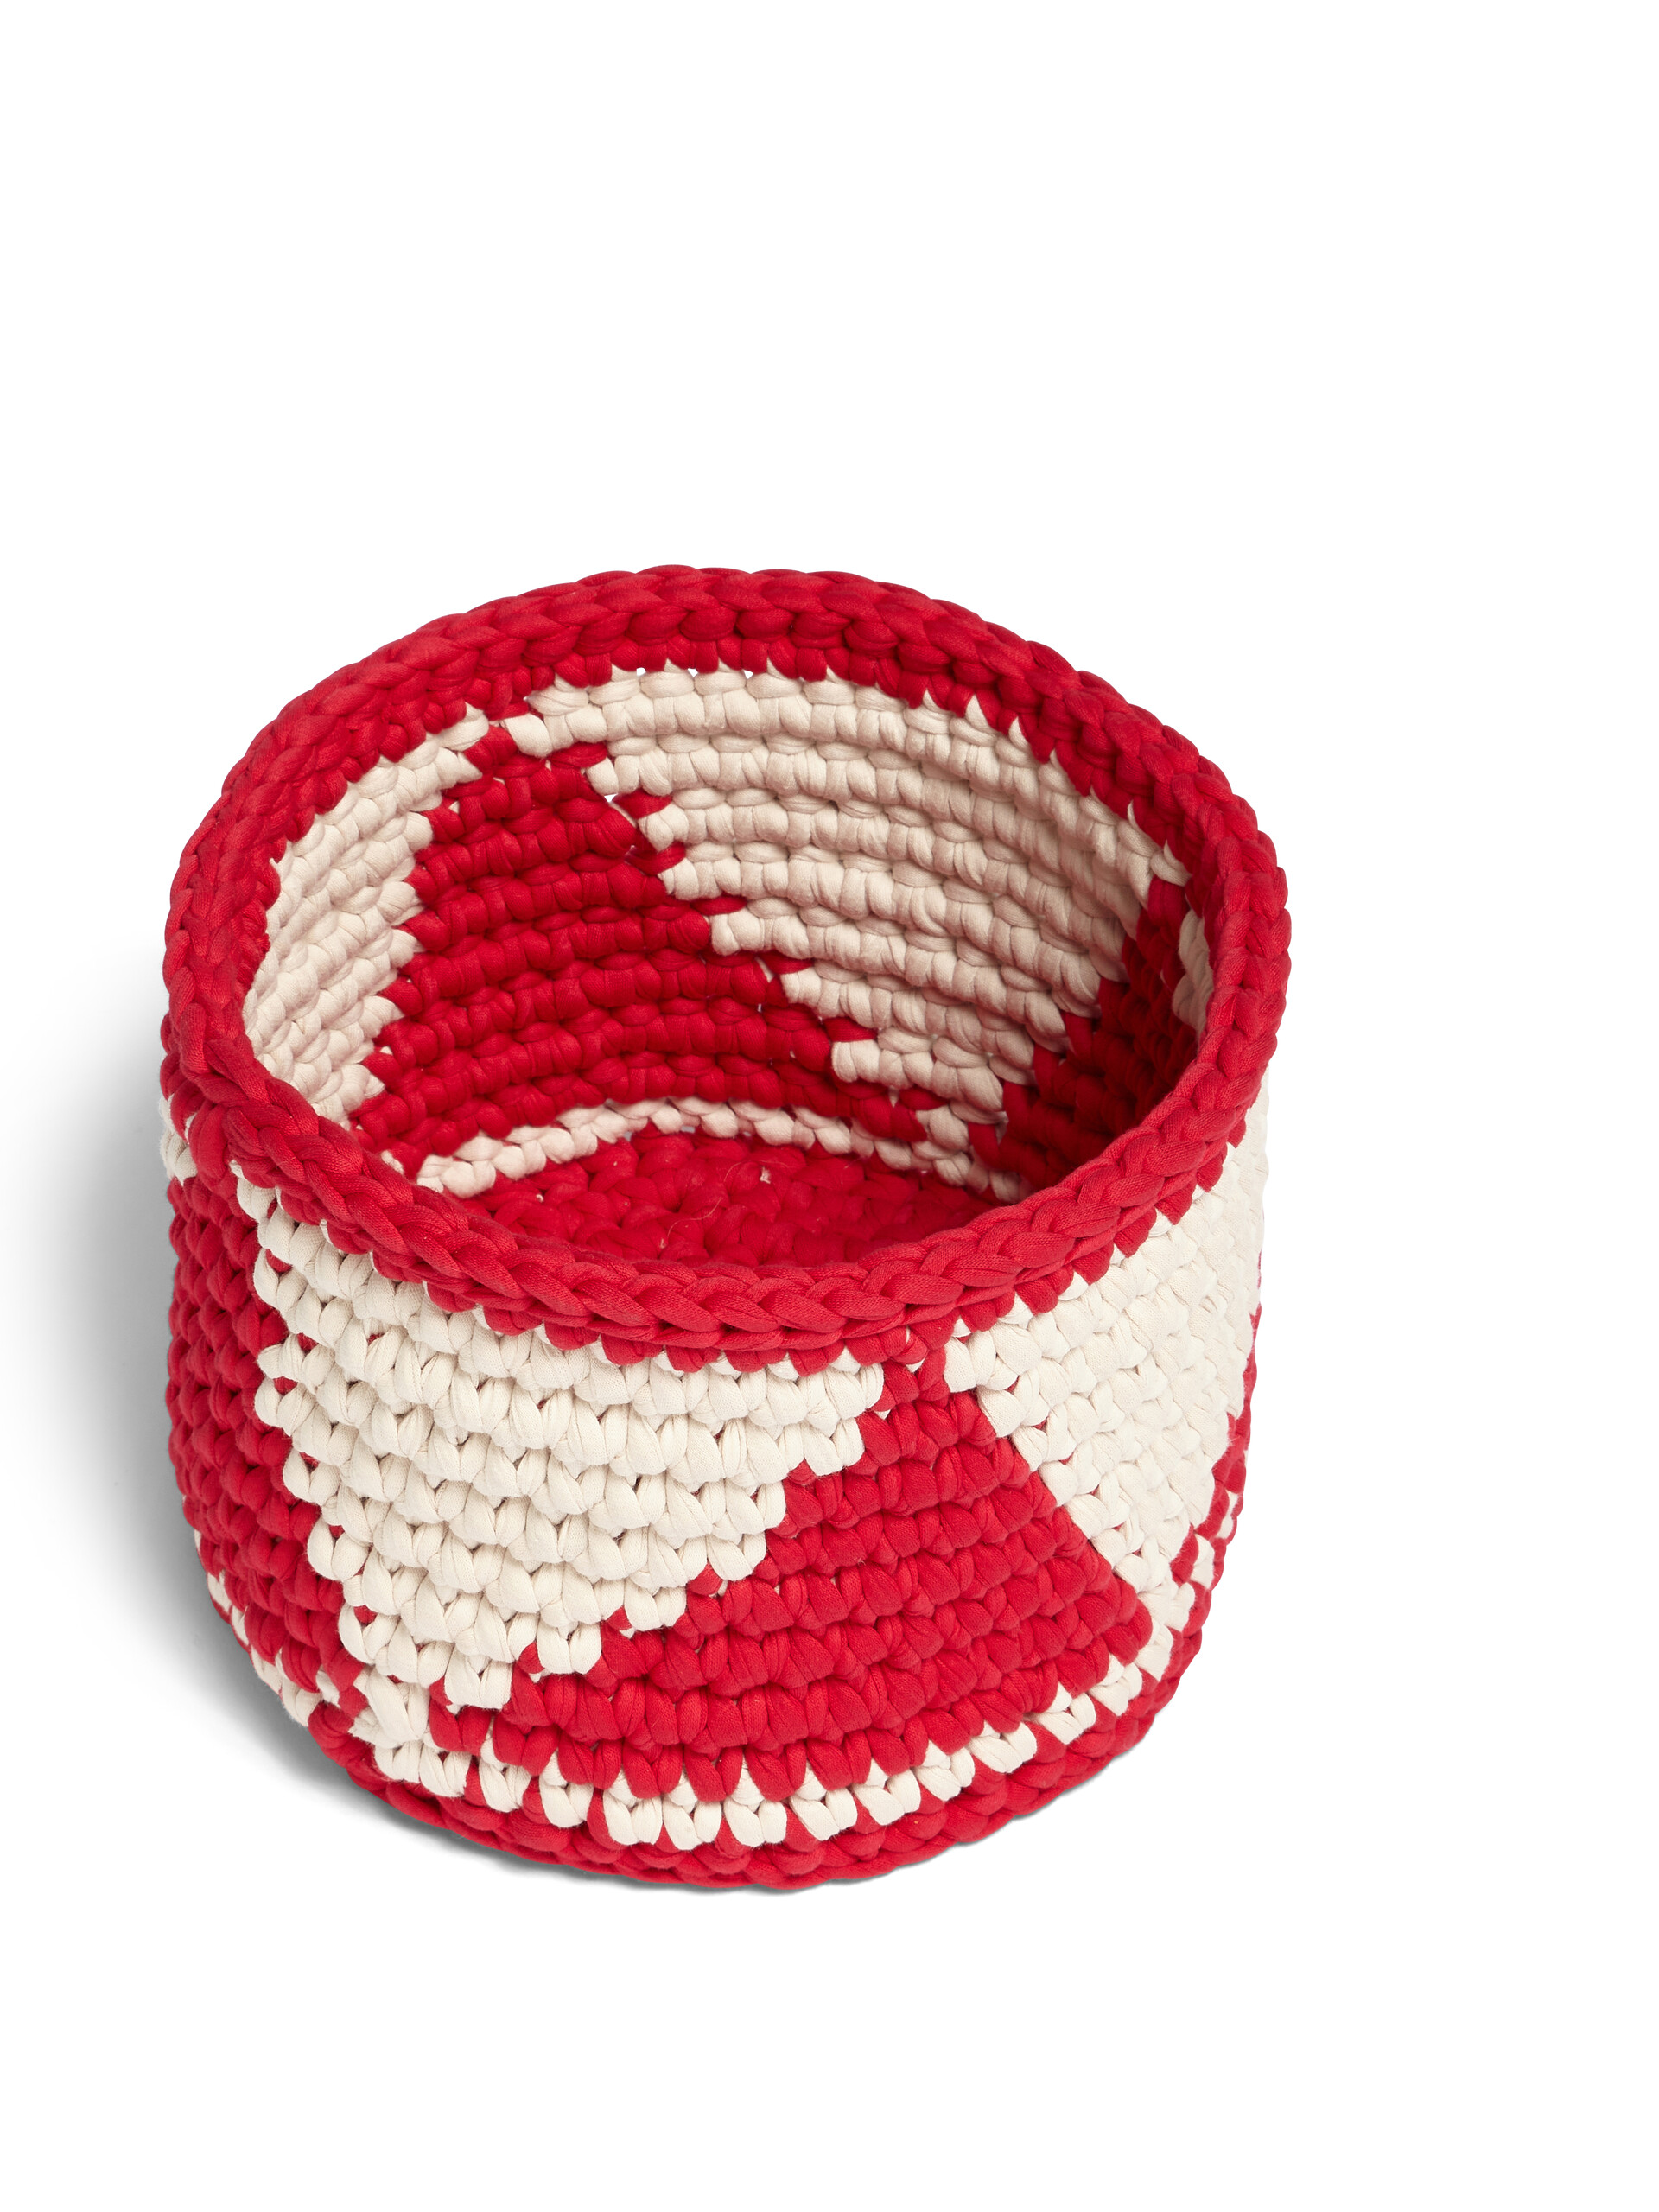 Small MARNI MARKET vase holder in white and red crochet - Furniture - Image 3